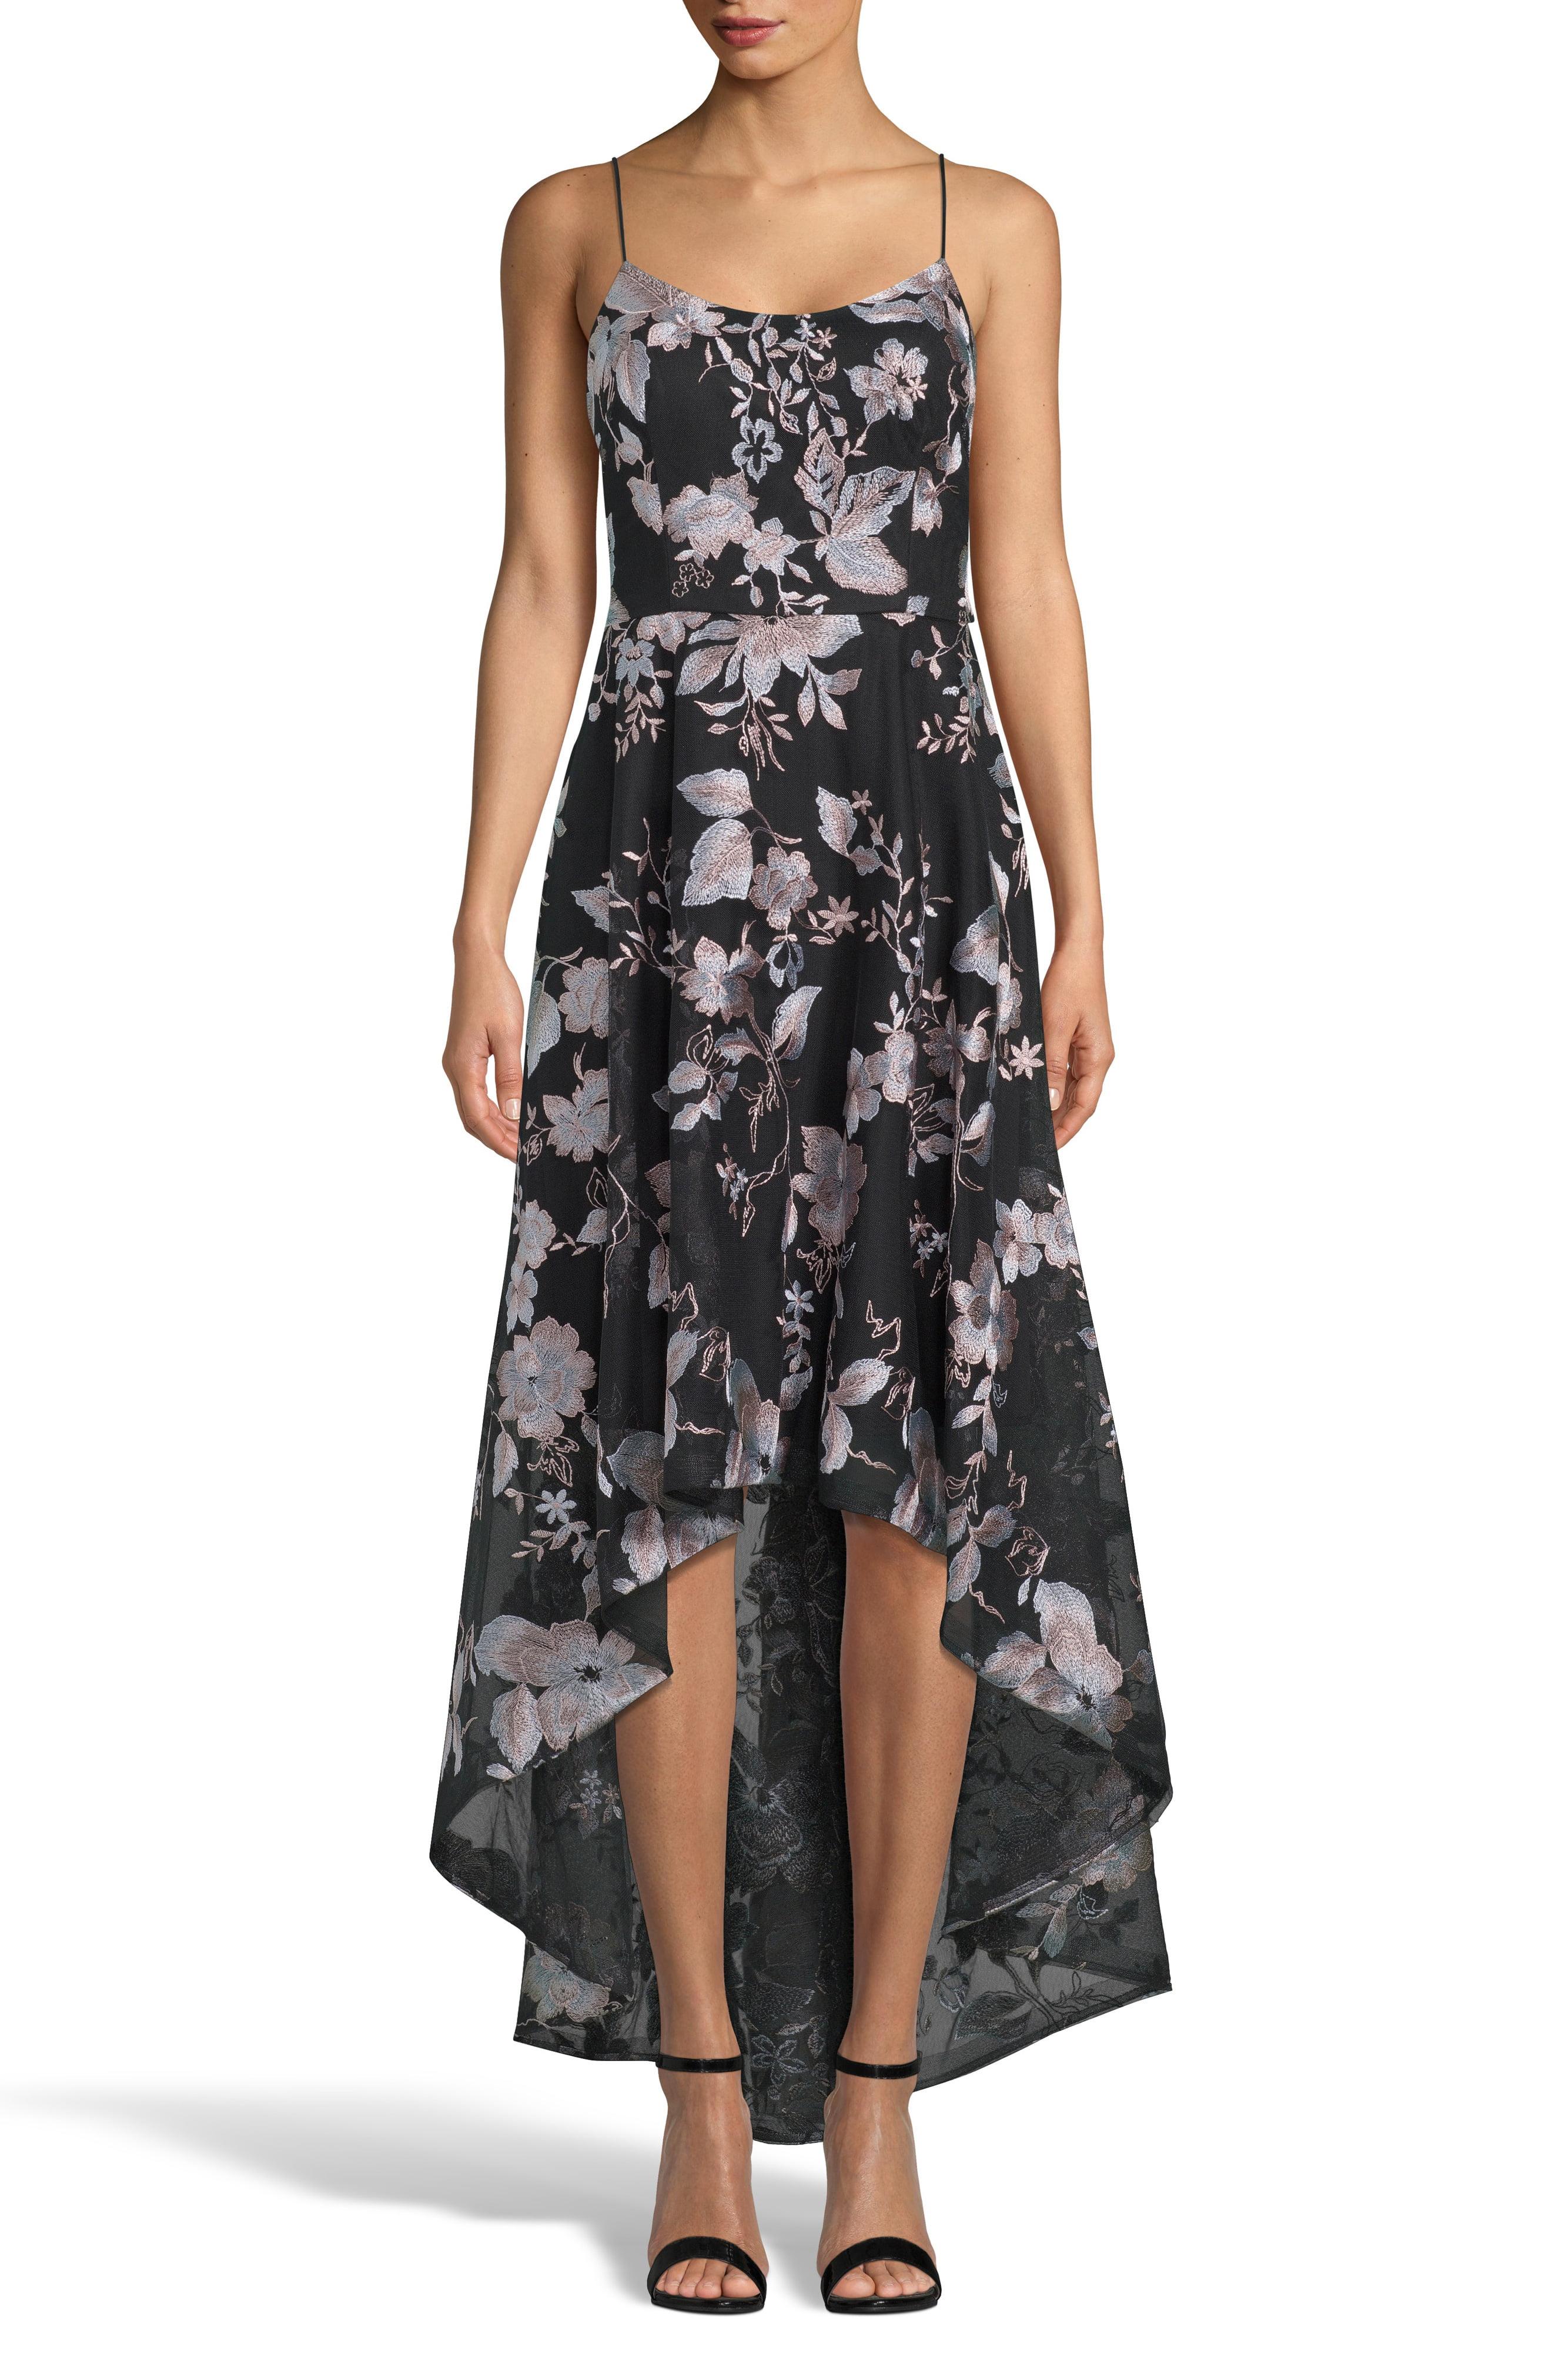 Xscape Floral Embroidery High/low Cocktail Dress in Black/Blush Floral ...